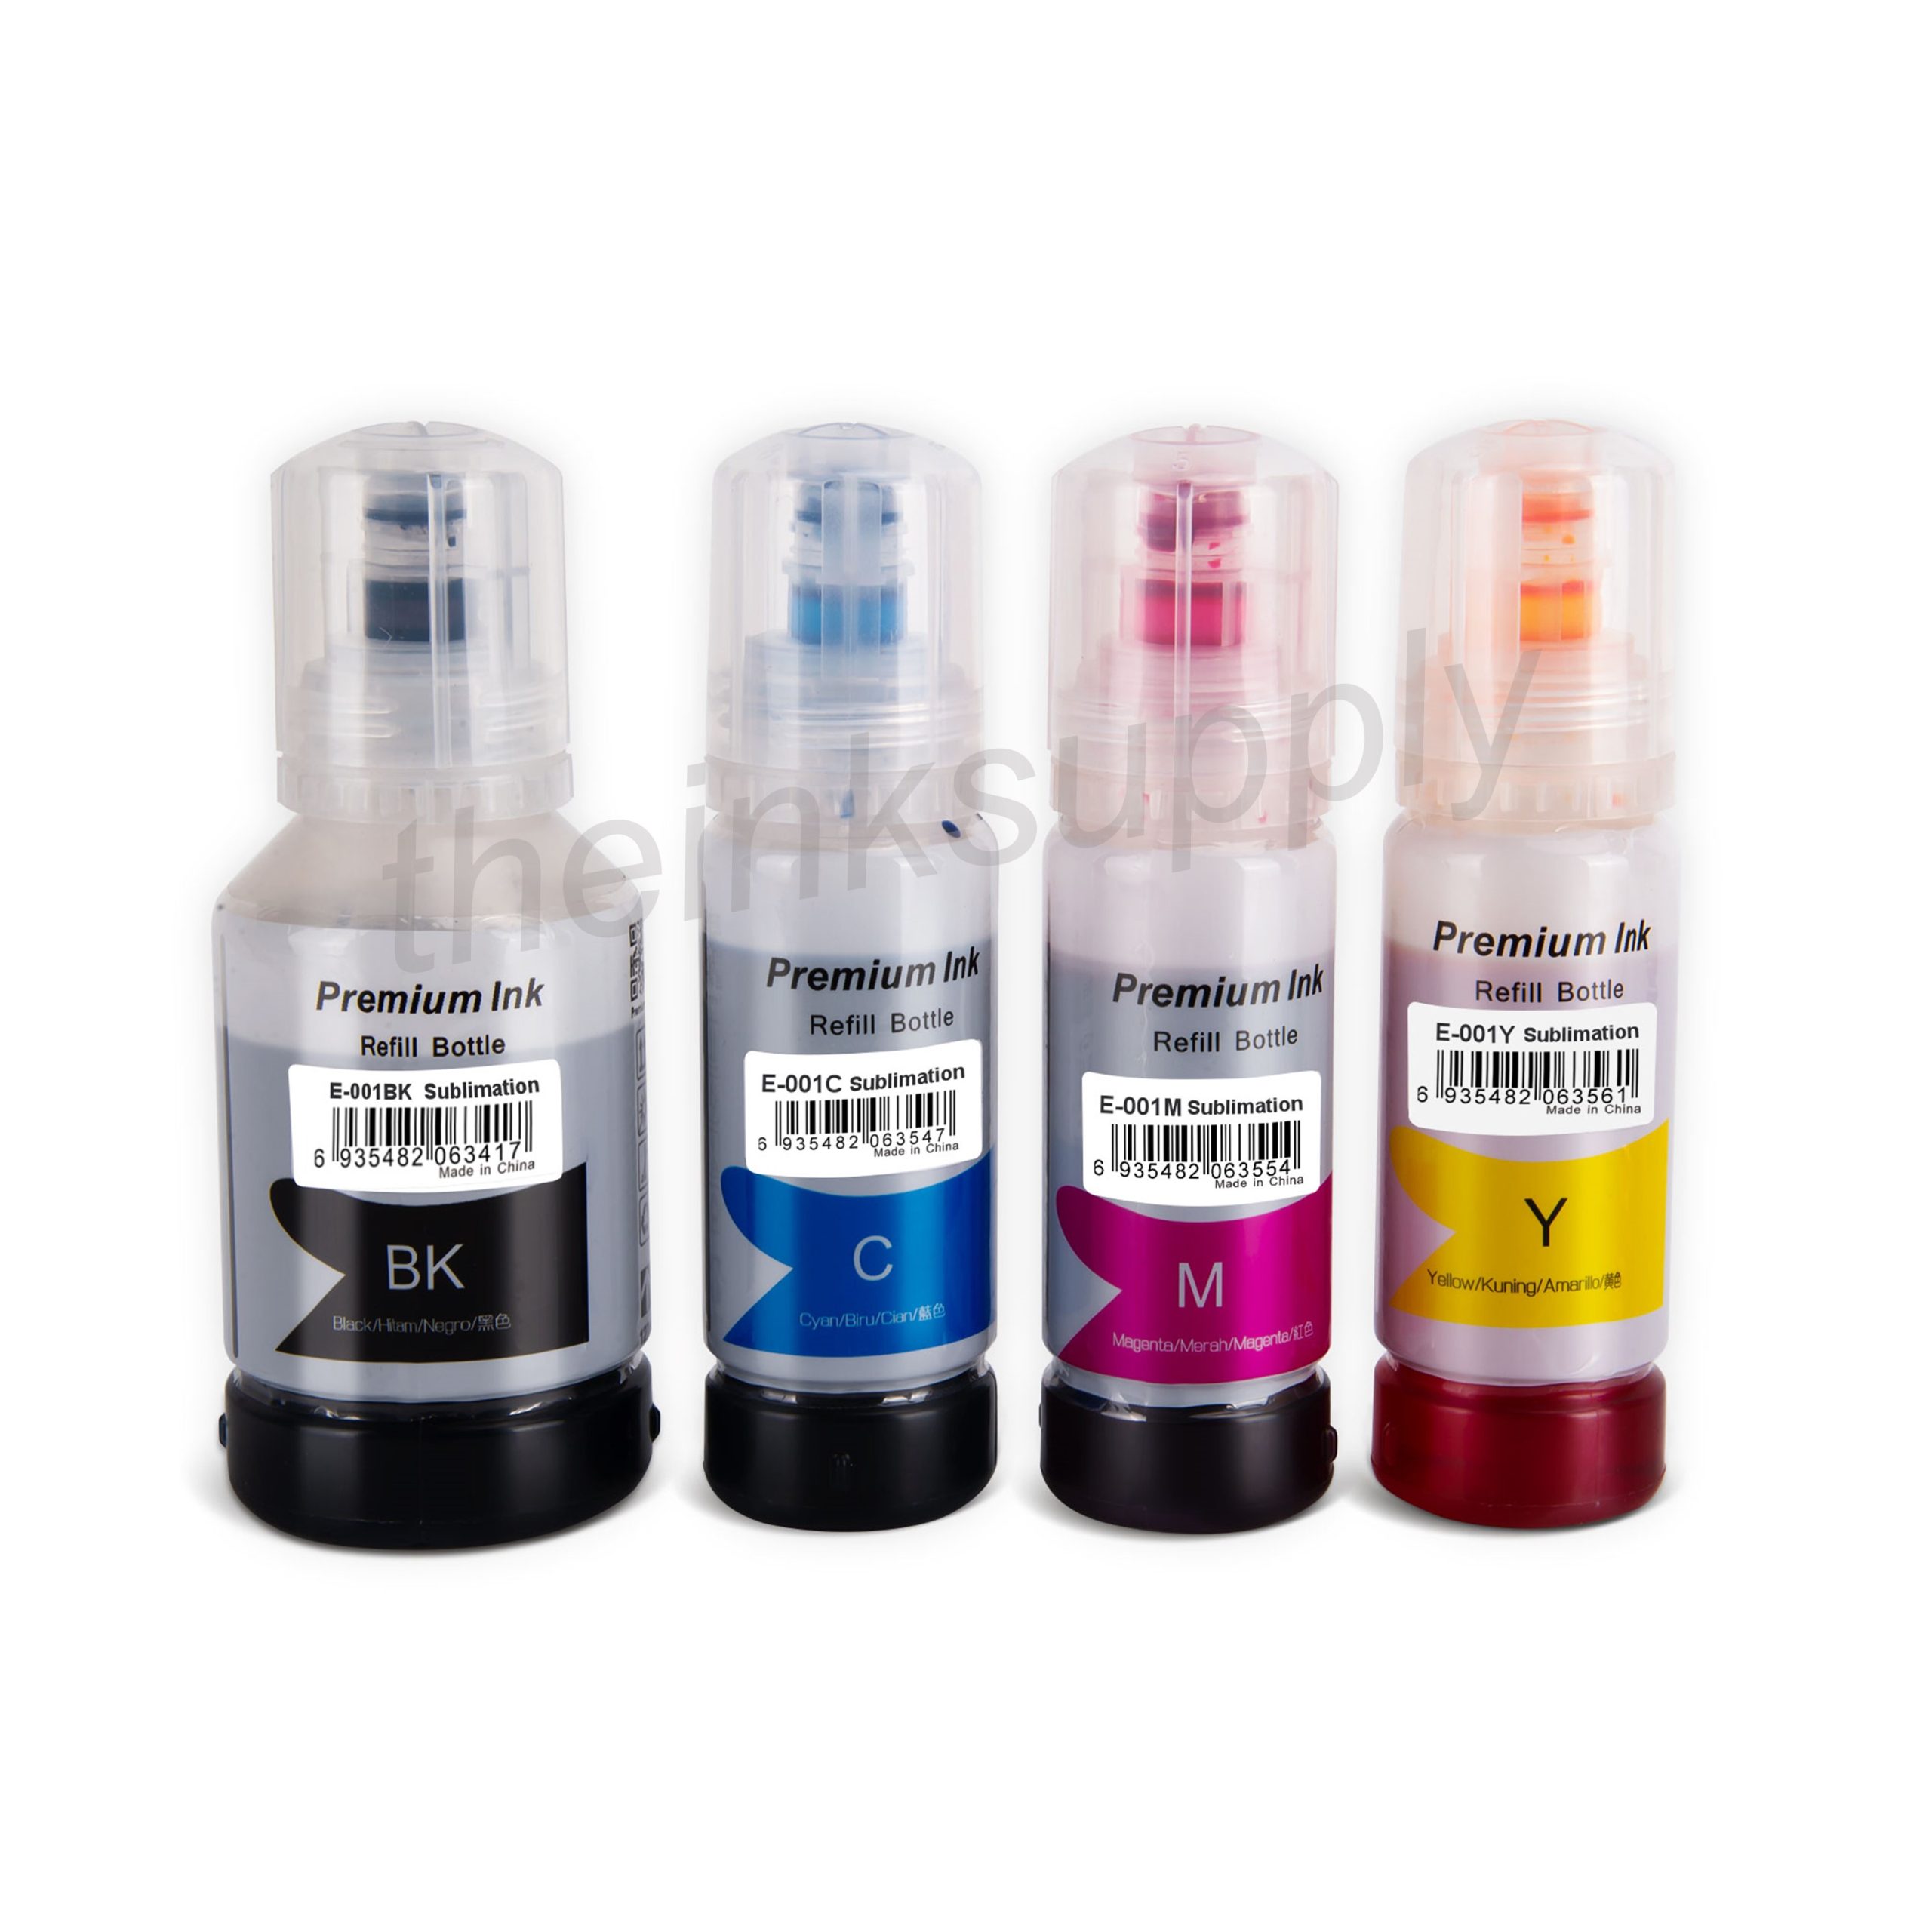 001 sublimation ink